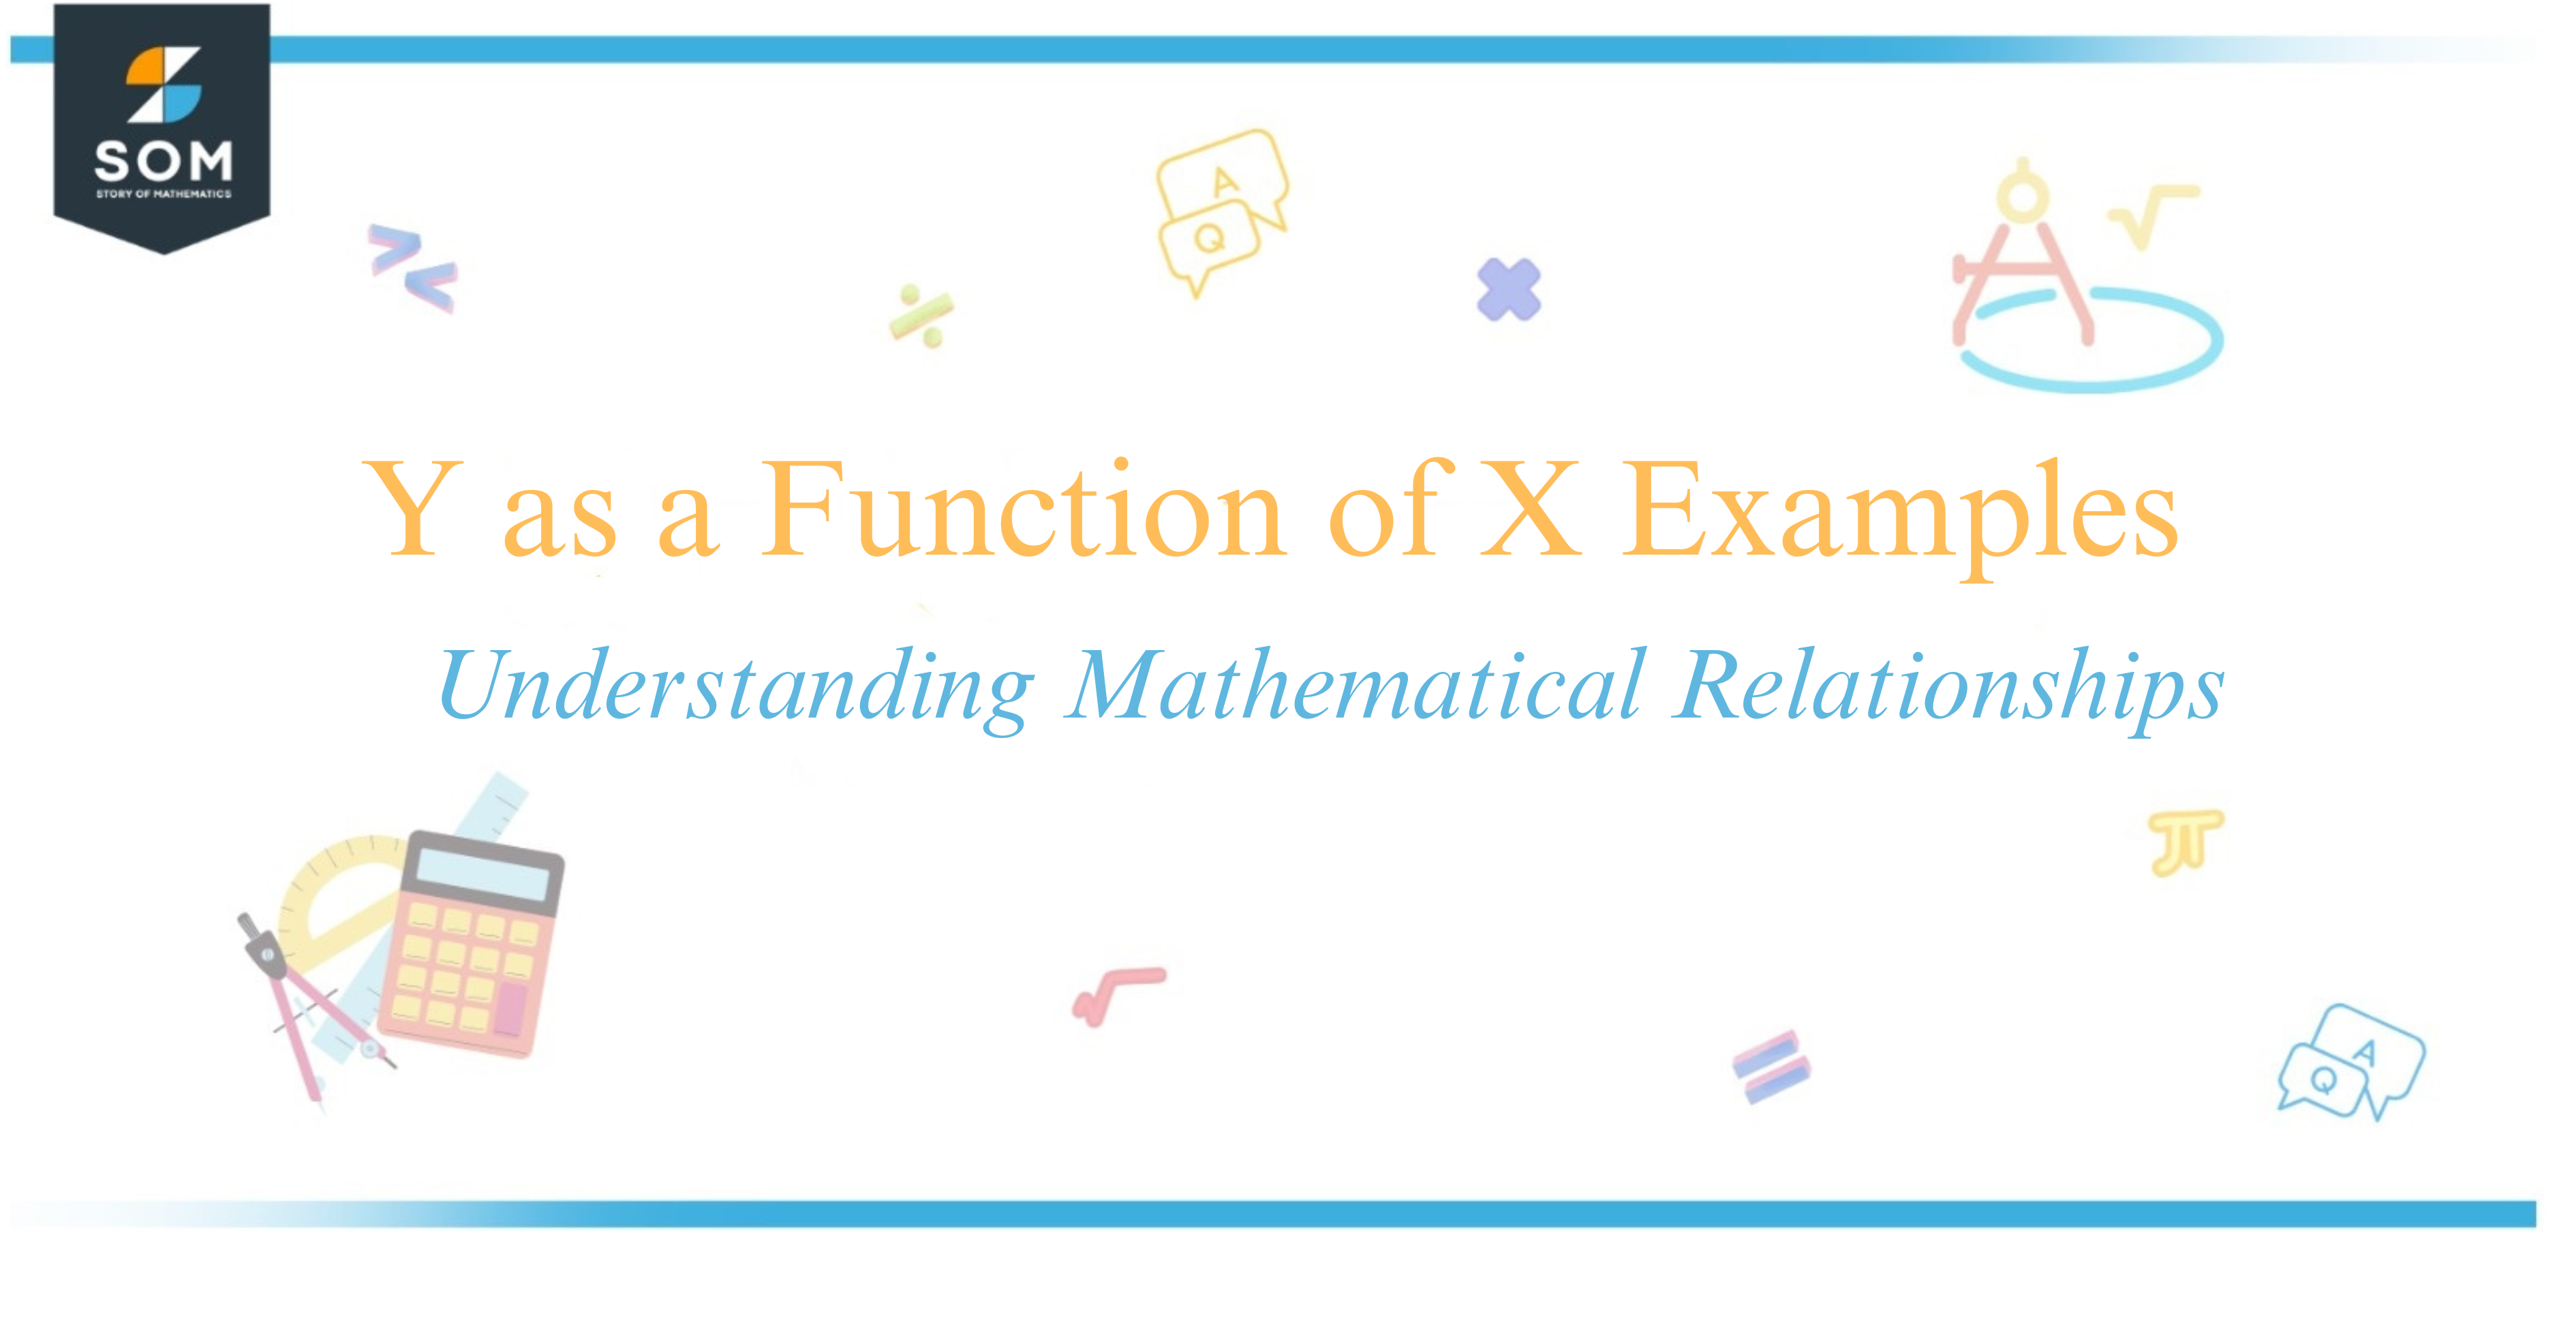 Y as a Function of X Examples Understanding Mathematical Relationships